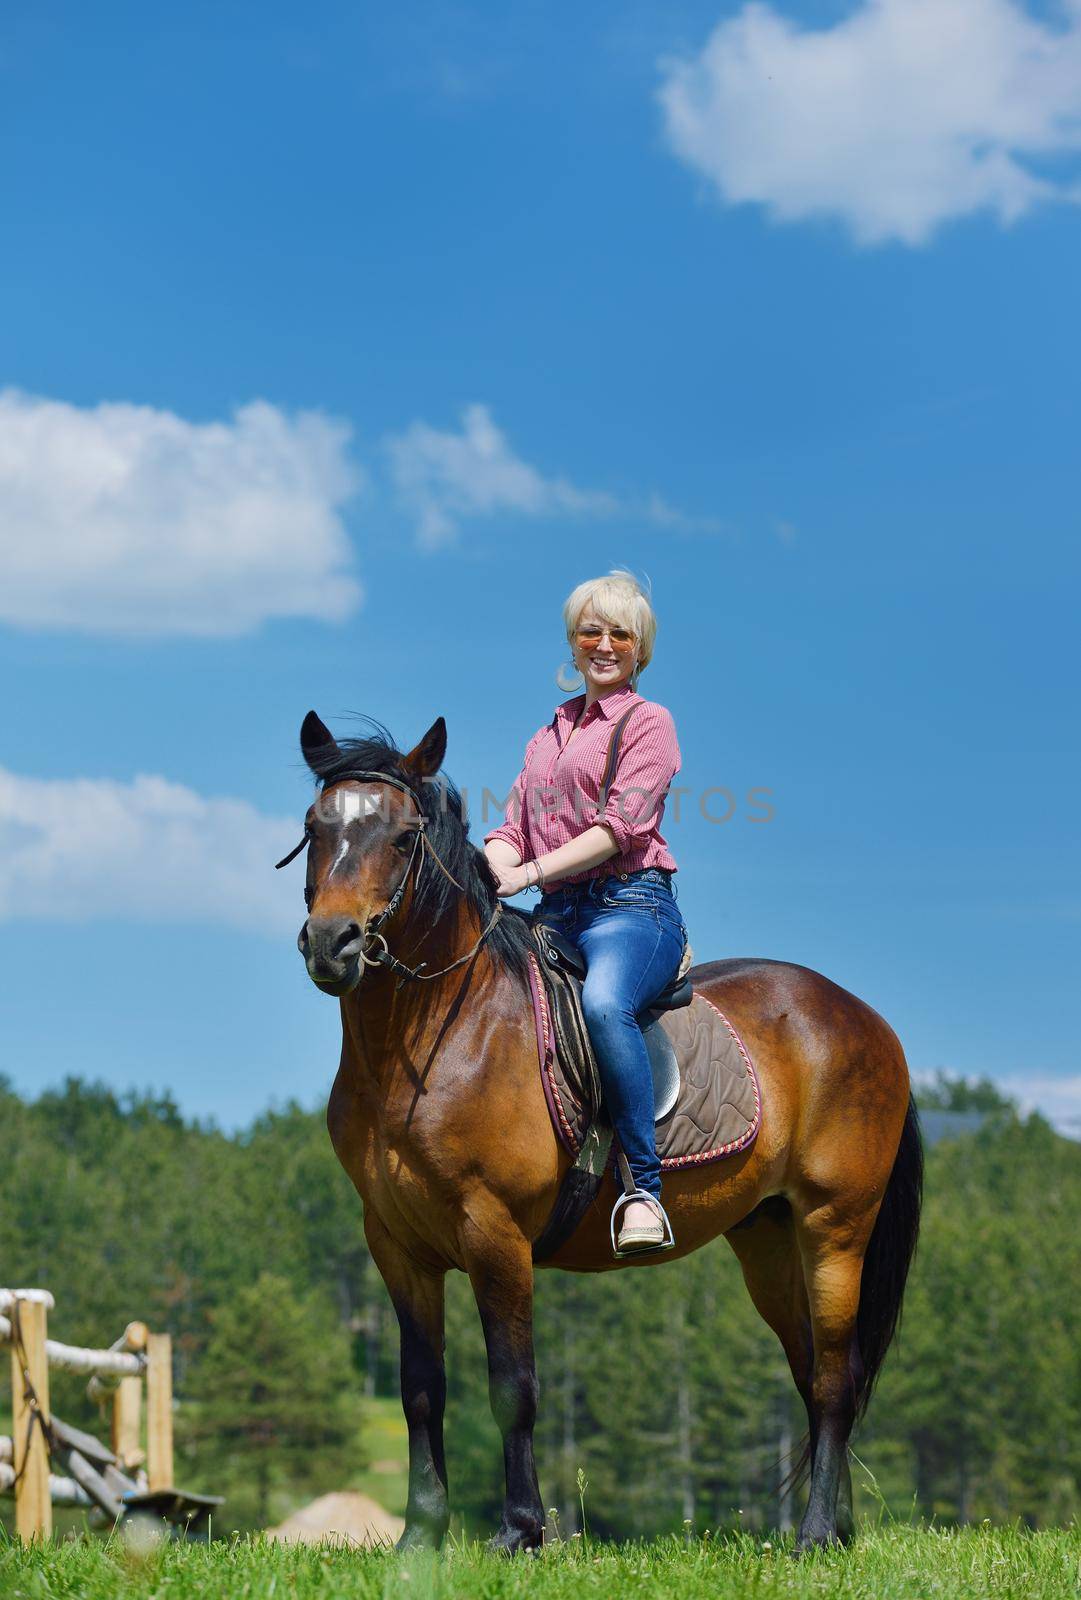 happy woman in sunglasses sitting on horse farm animal outdoors with blue sky in background